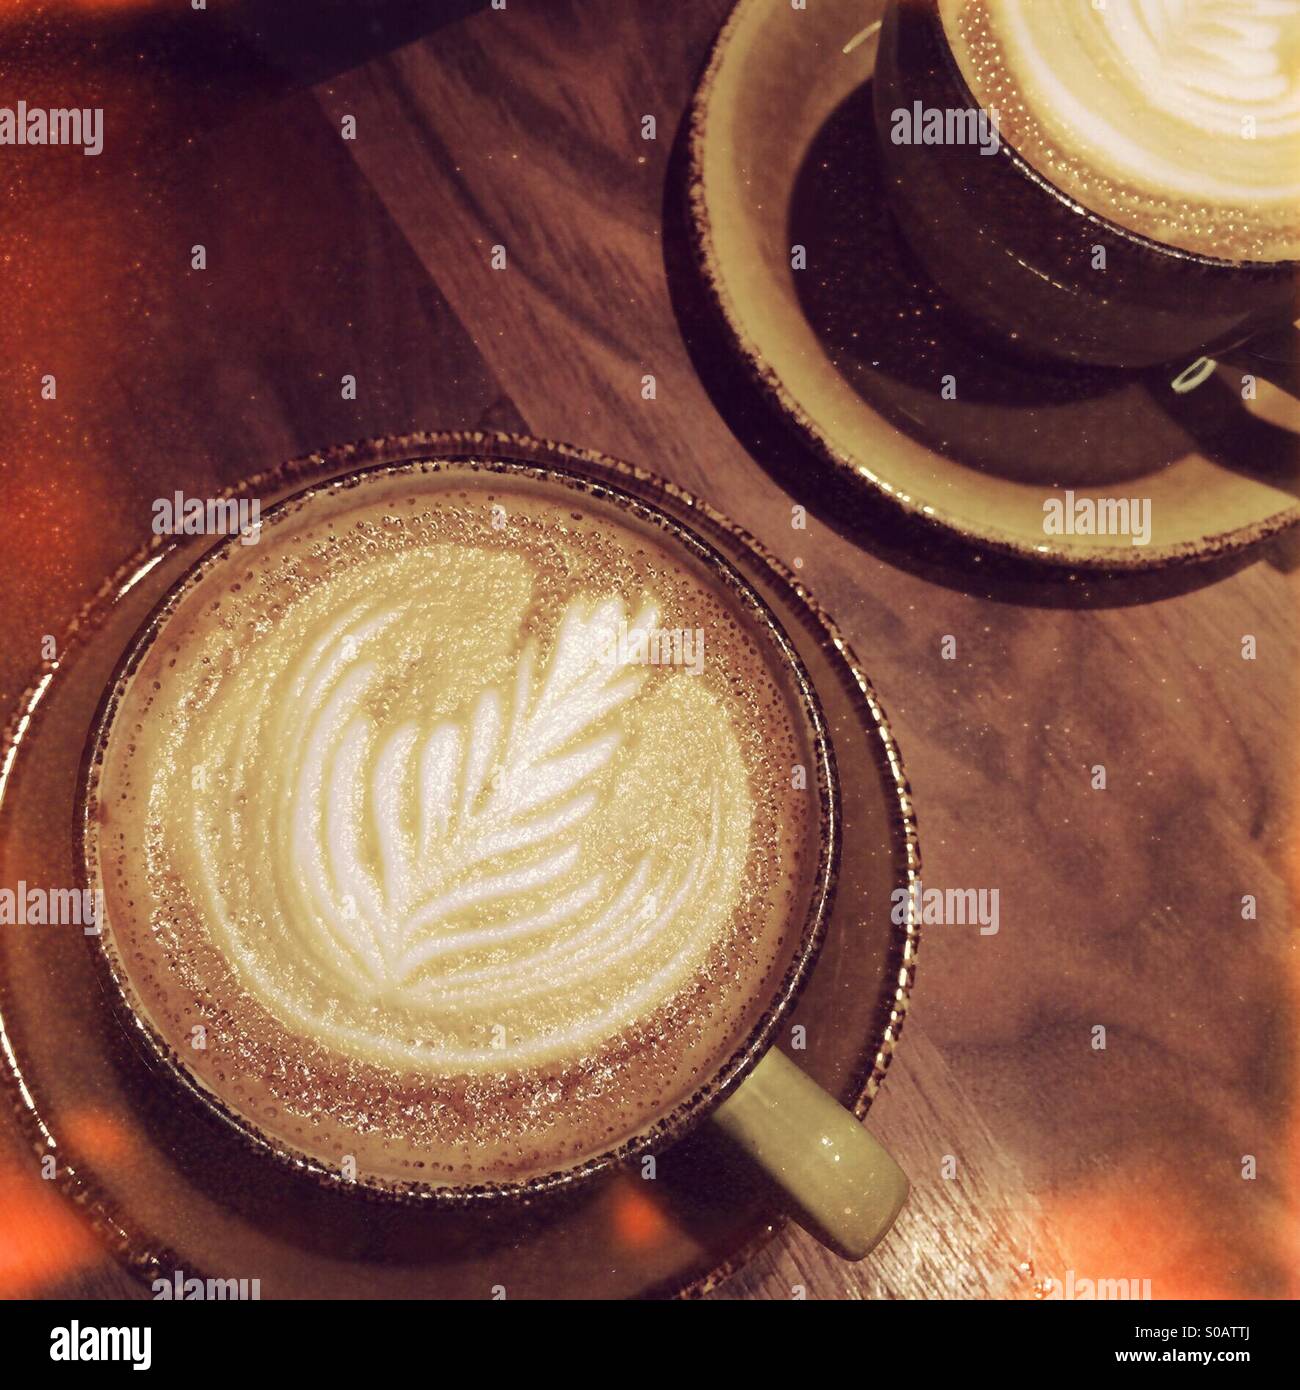 Two flat white coffee drinks on a table in a cafe Stock Photo